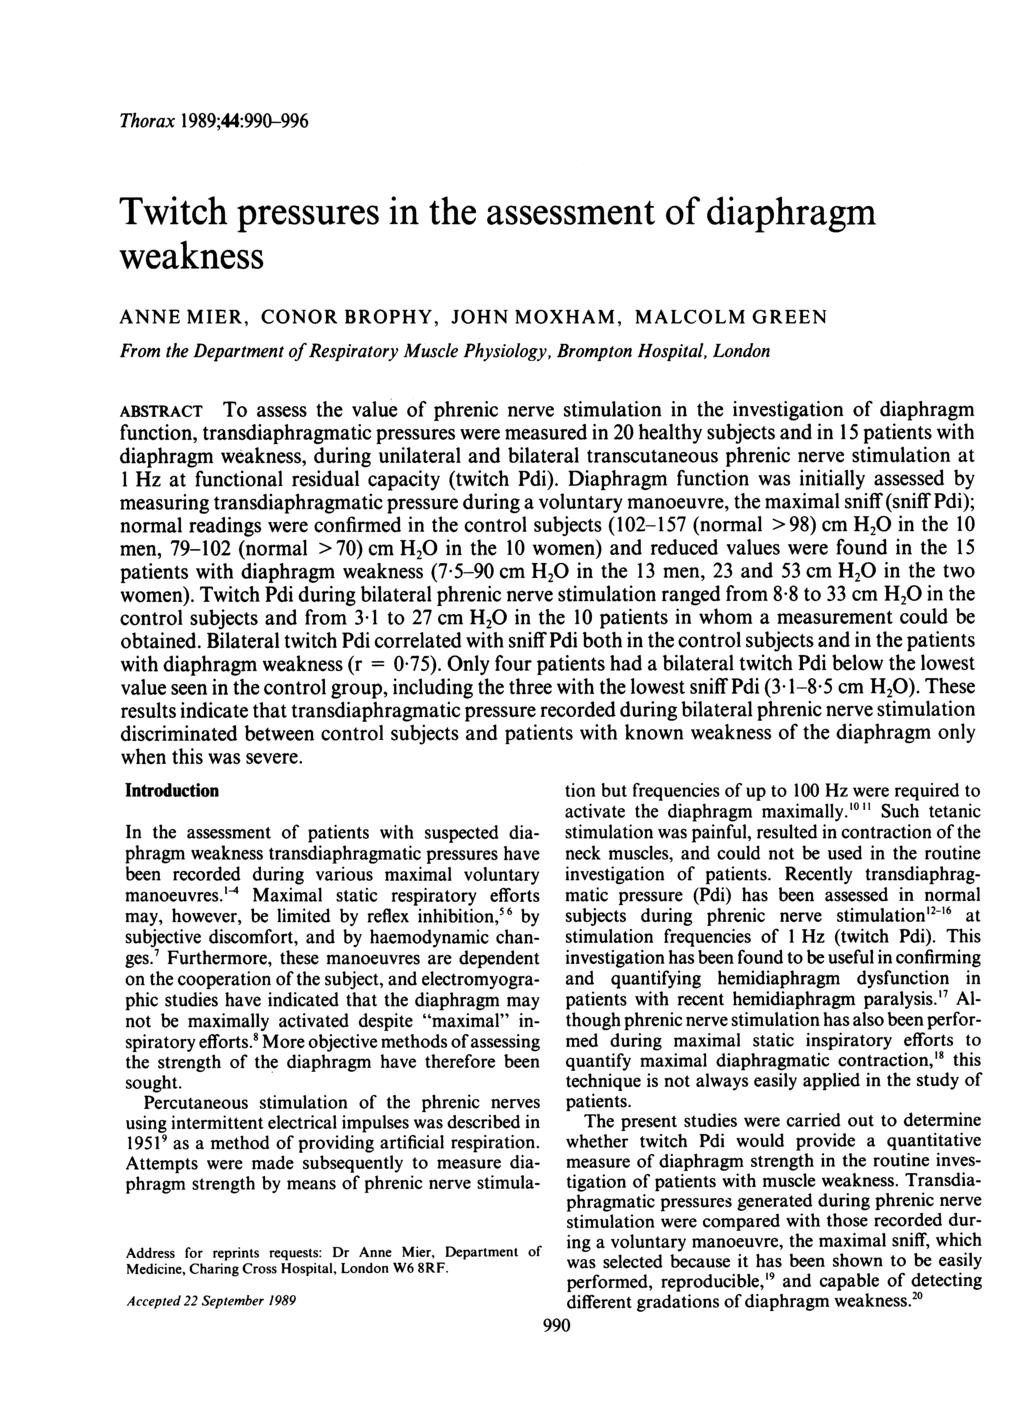 Thorax 1989;44:99-996 Twitch pressures in the assessment of diaphragm weakness ANNE MIER, CONOR BROPHY, JOHN MOXHAM, MALCOLM GREEN From the Department of Respiratory Muscle Physiology, Brompton